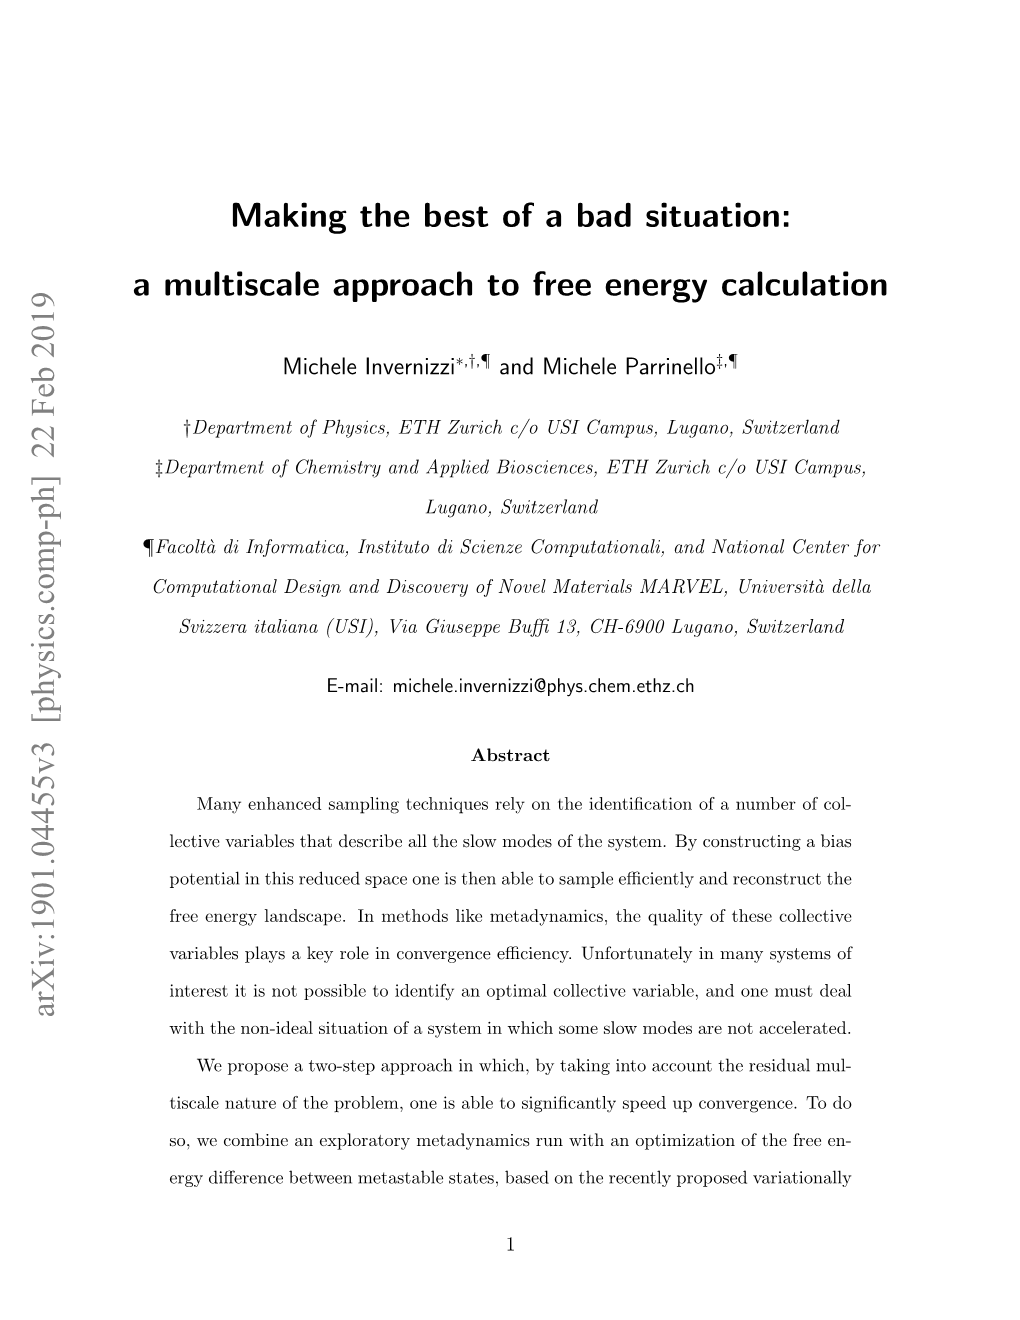 Making the Best of a Bad Situation: a Multiscale Approach to Free Energy Calculation Arxiv:1901.04455V3 [Physics.Comp-Ph] 22 F